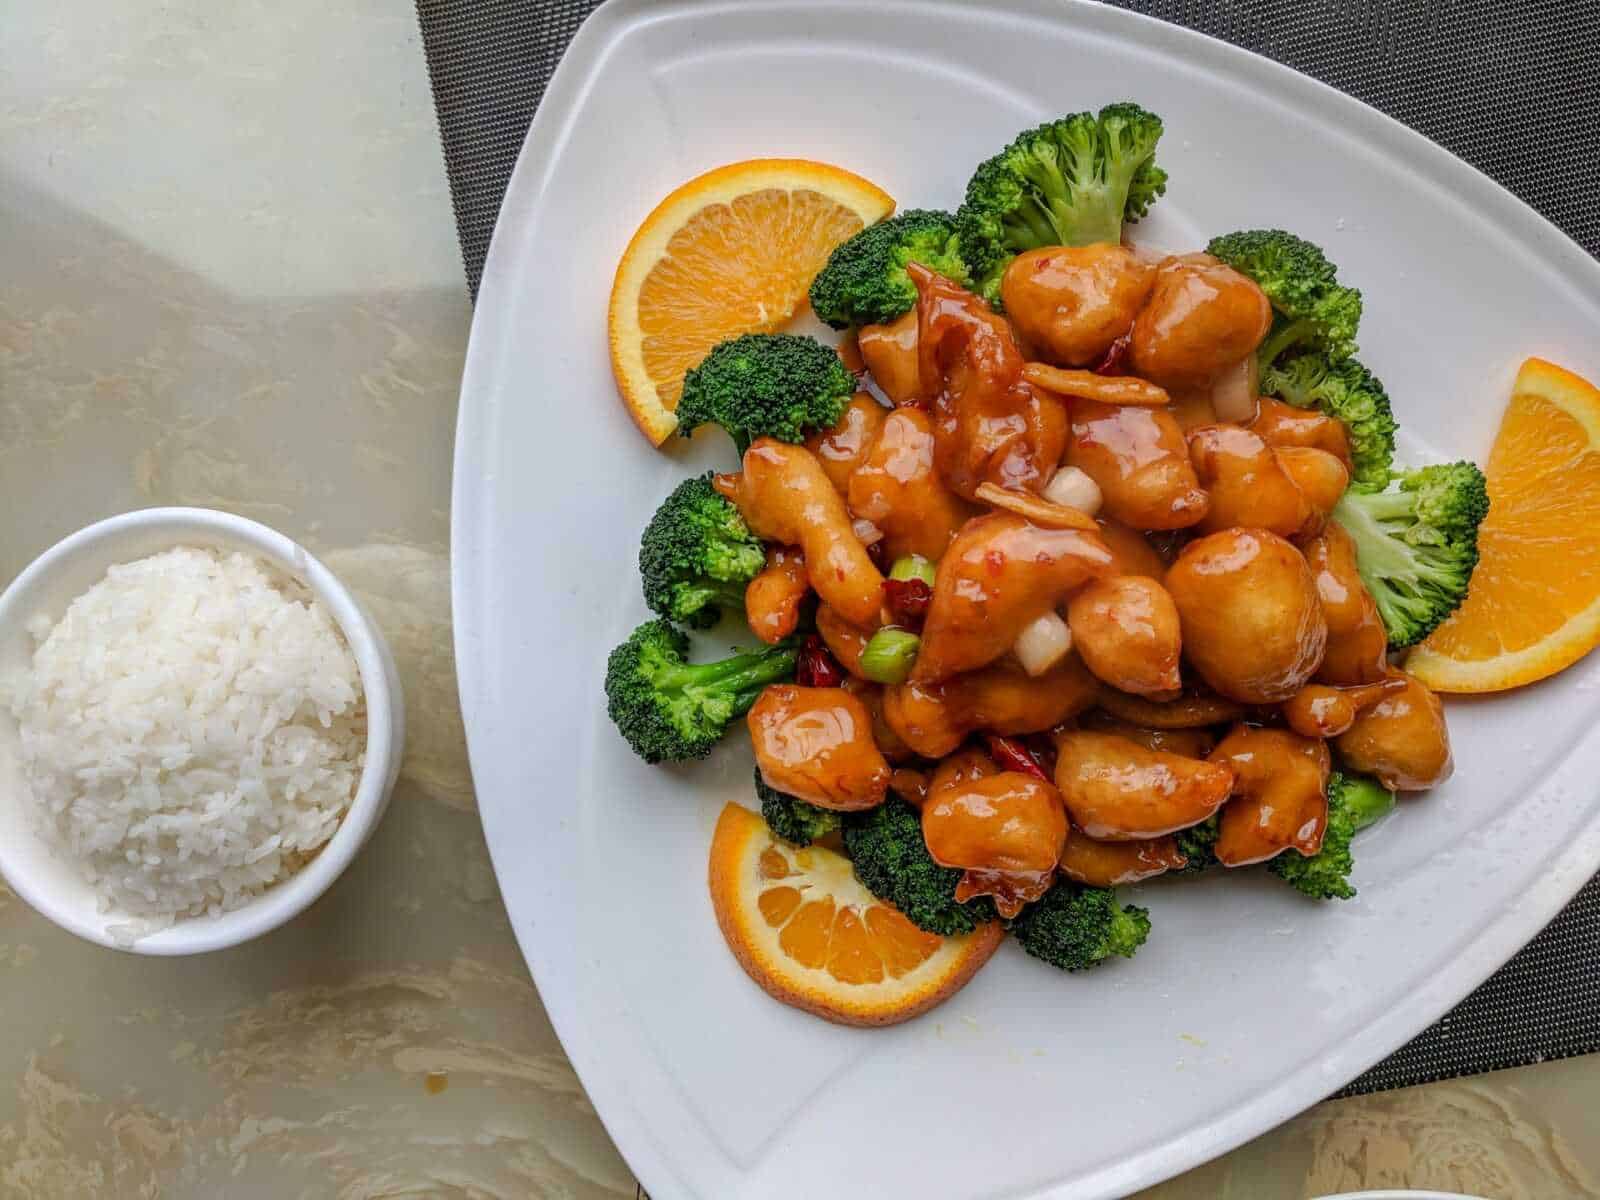 Low-carb Chinese food